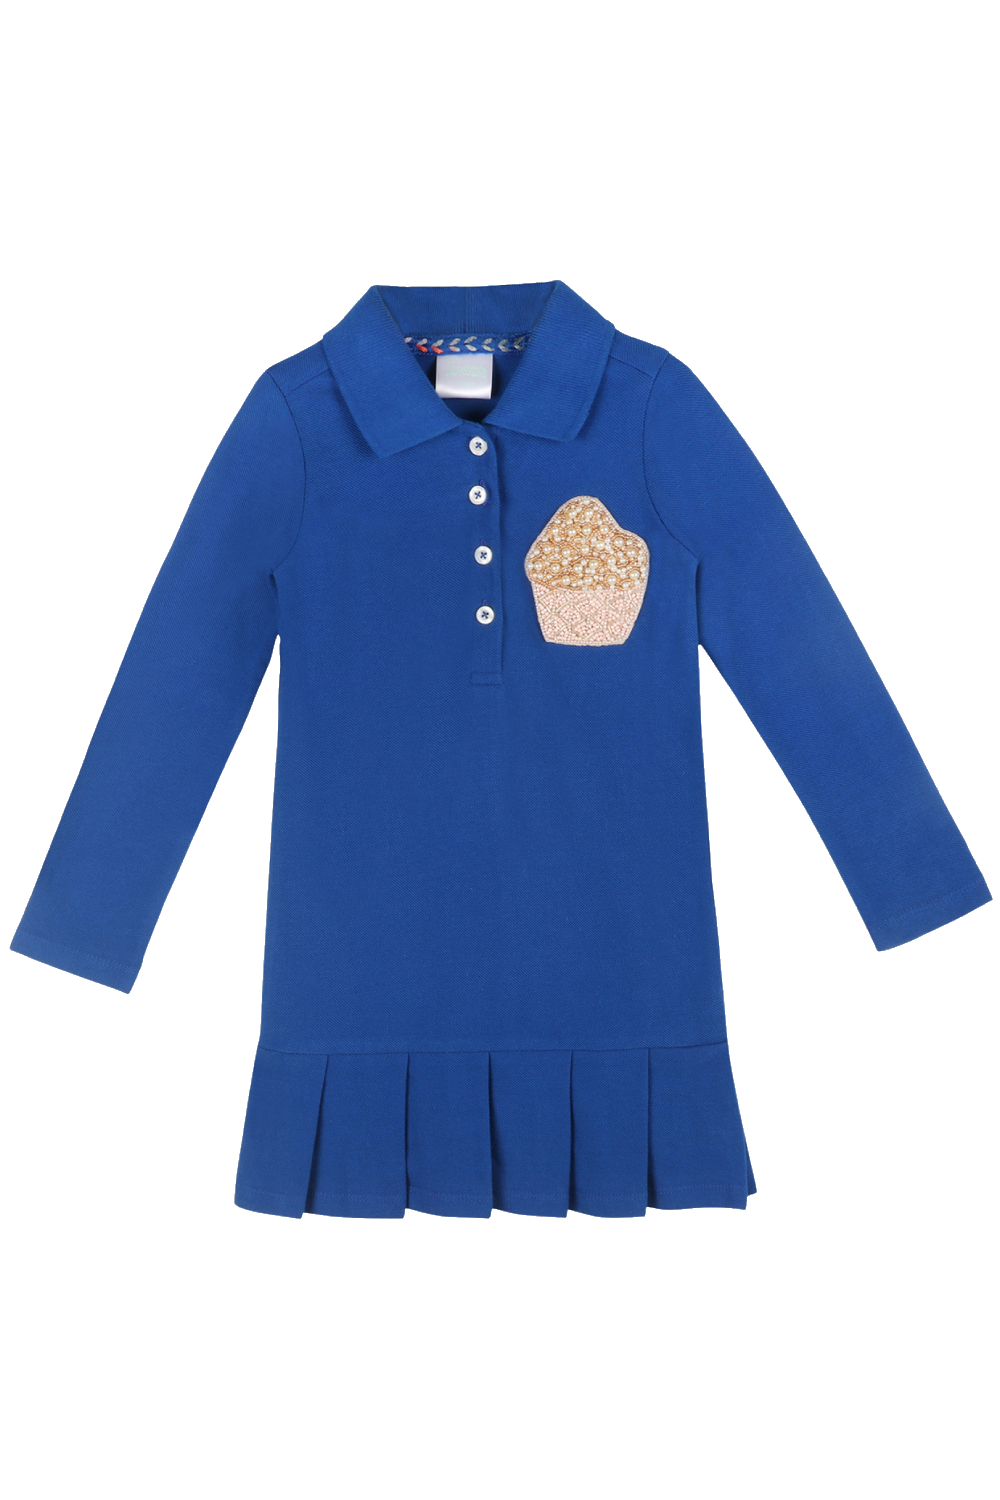 Girls Full Sleeves Polo Dress With Pleats And Cup Cake Motif